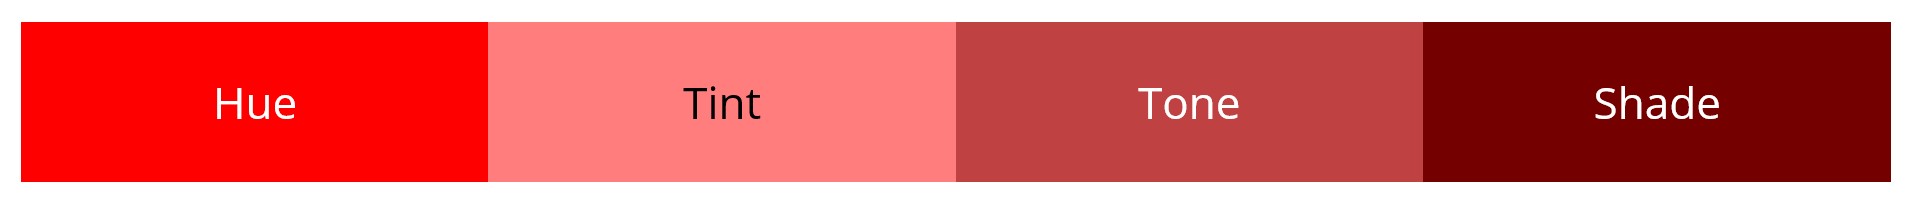 Four rectangles, illustrating the concept of hue, tint, tone, and shade. The first rectangle is a pure red hue. The second is a tint of red, or a medium pink. The third is a tone of red, or a greyish, washed-out red. The fourth is a shade of red, or a very dark red.